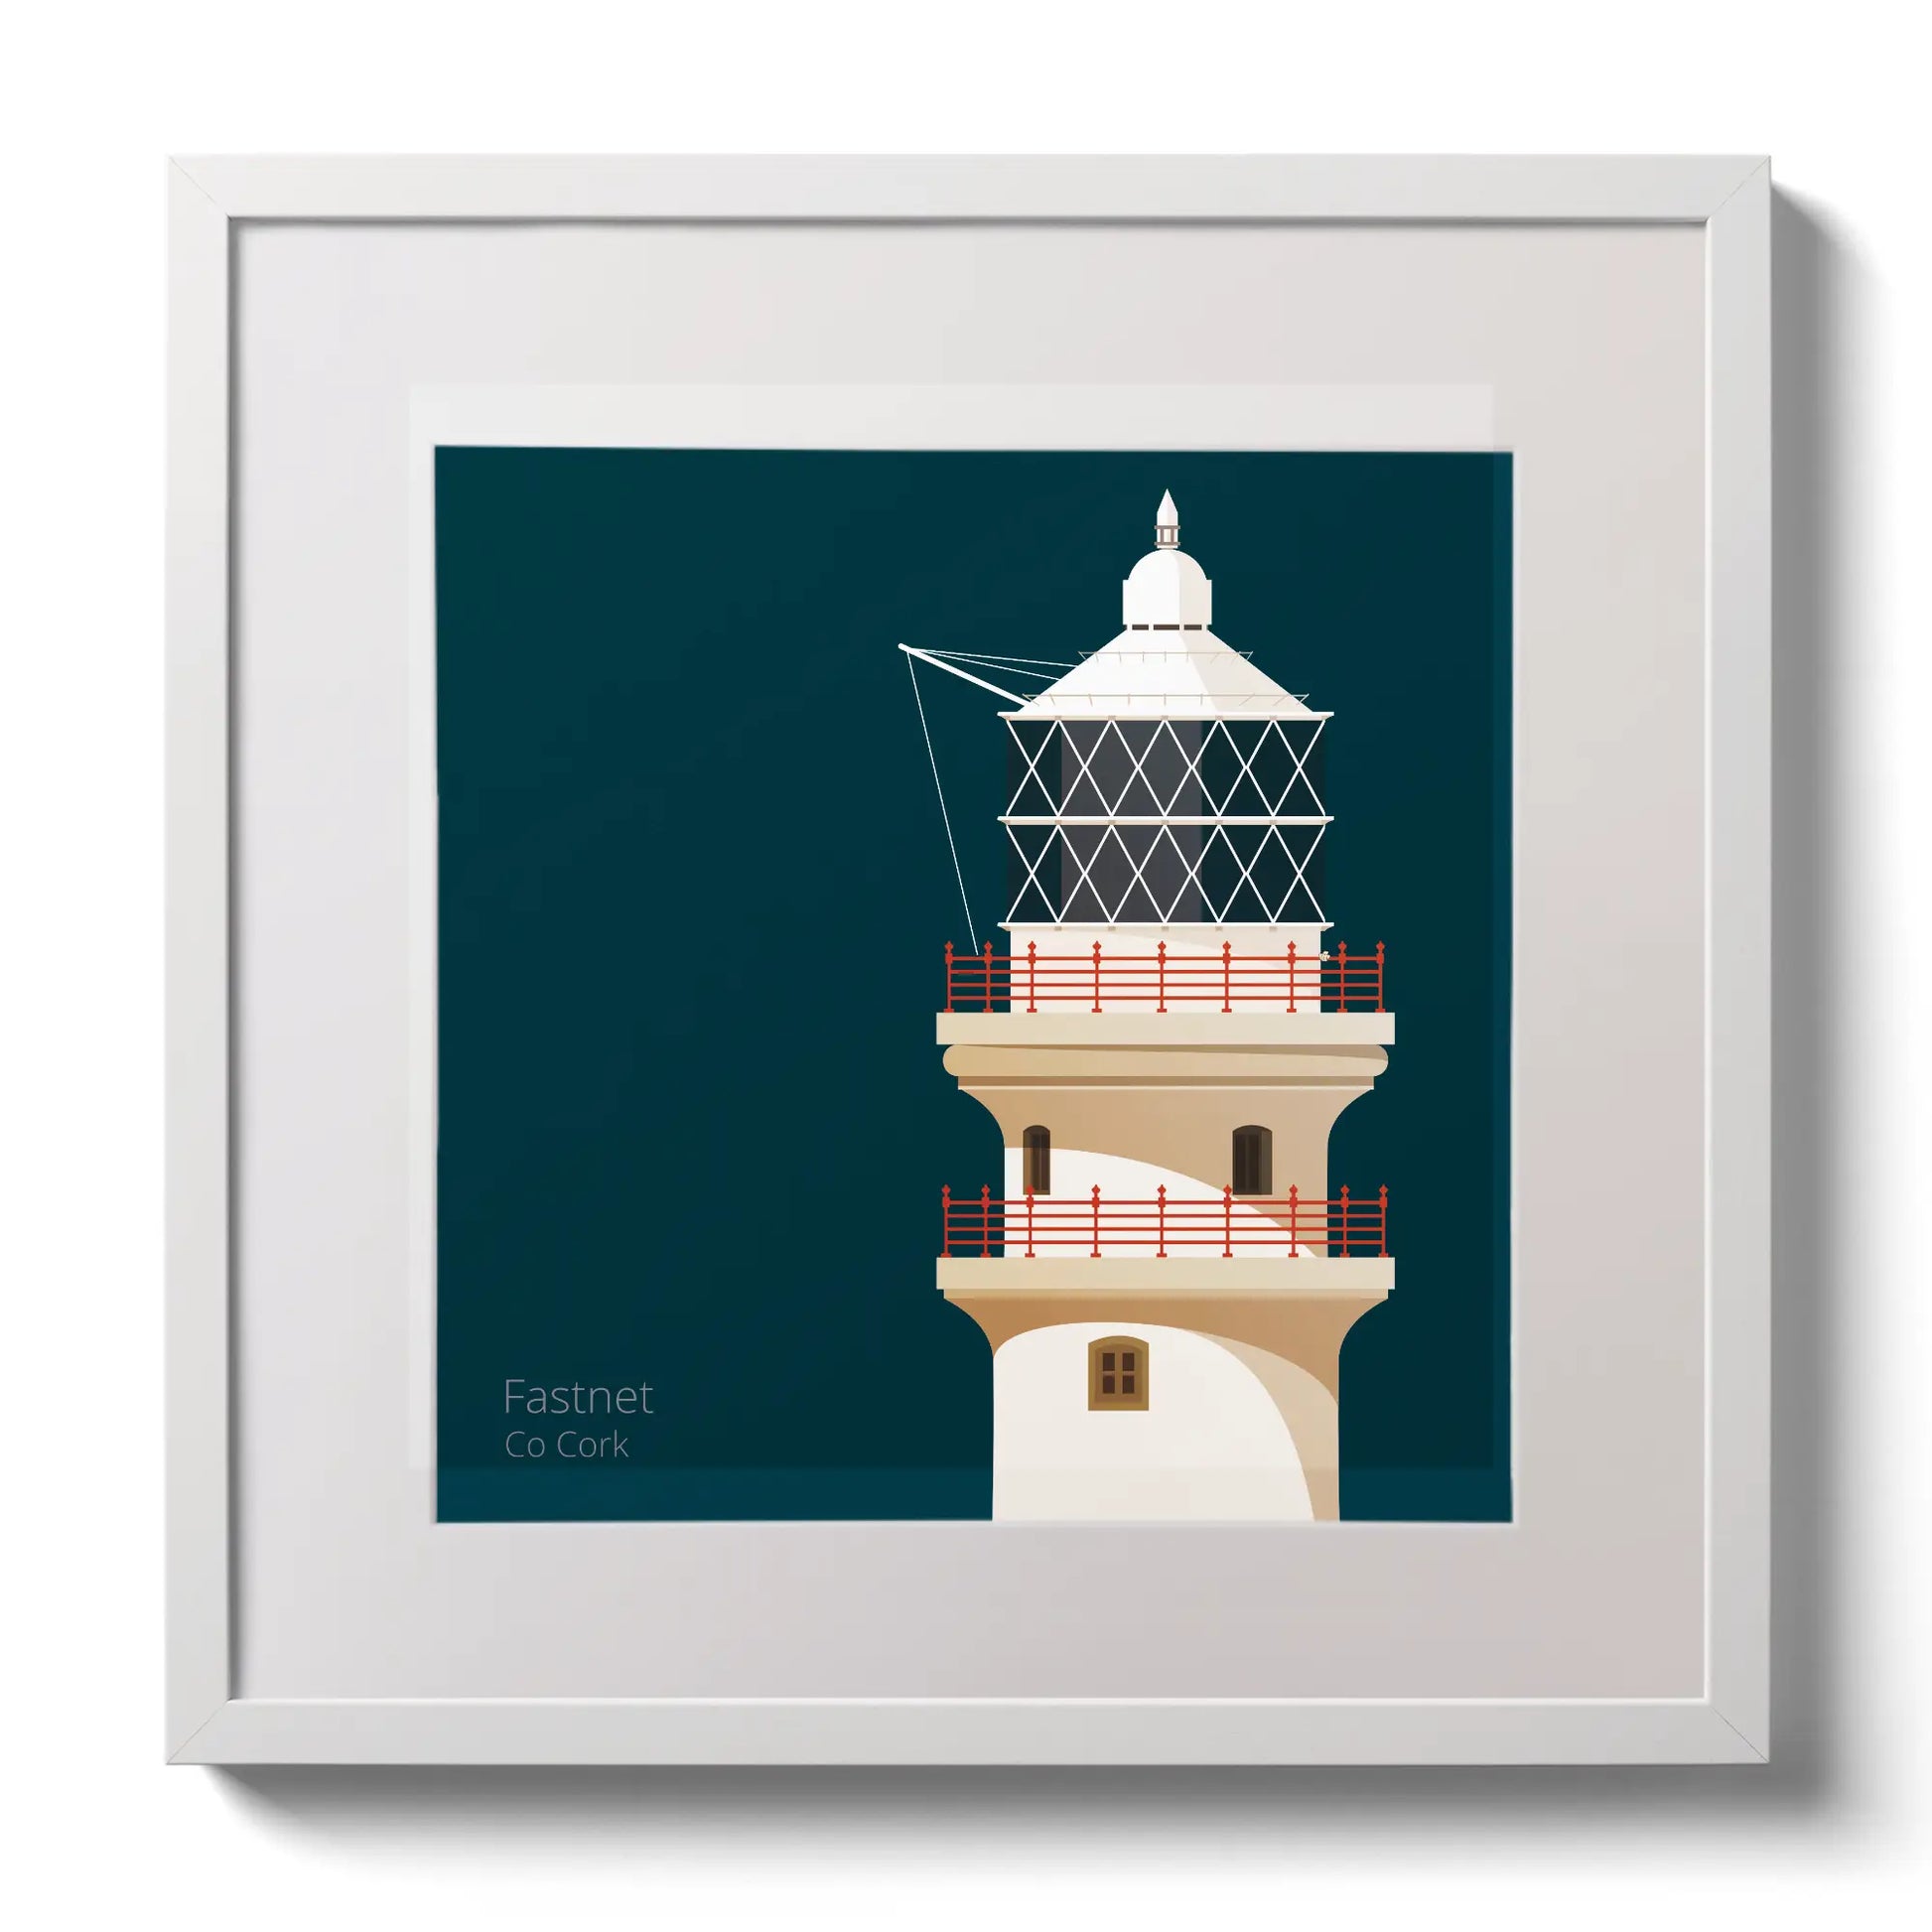 Illustration of Fastnet lighthouse on a midnight blue background,  in a white square frame measuring 30x30cm.